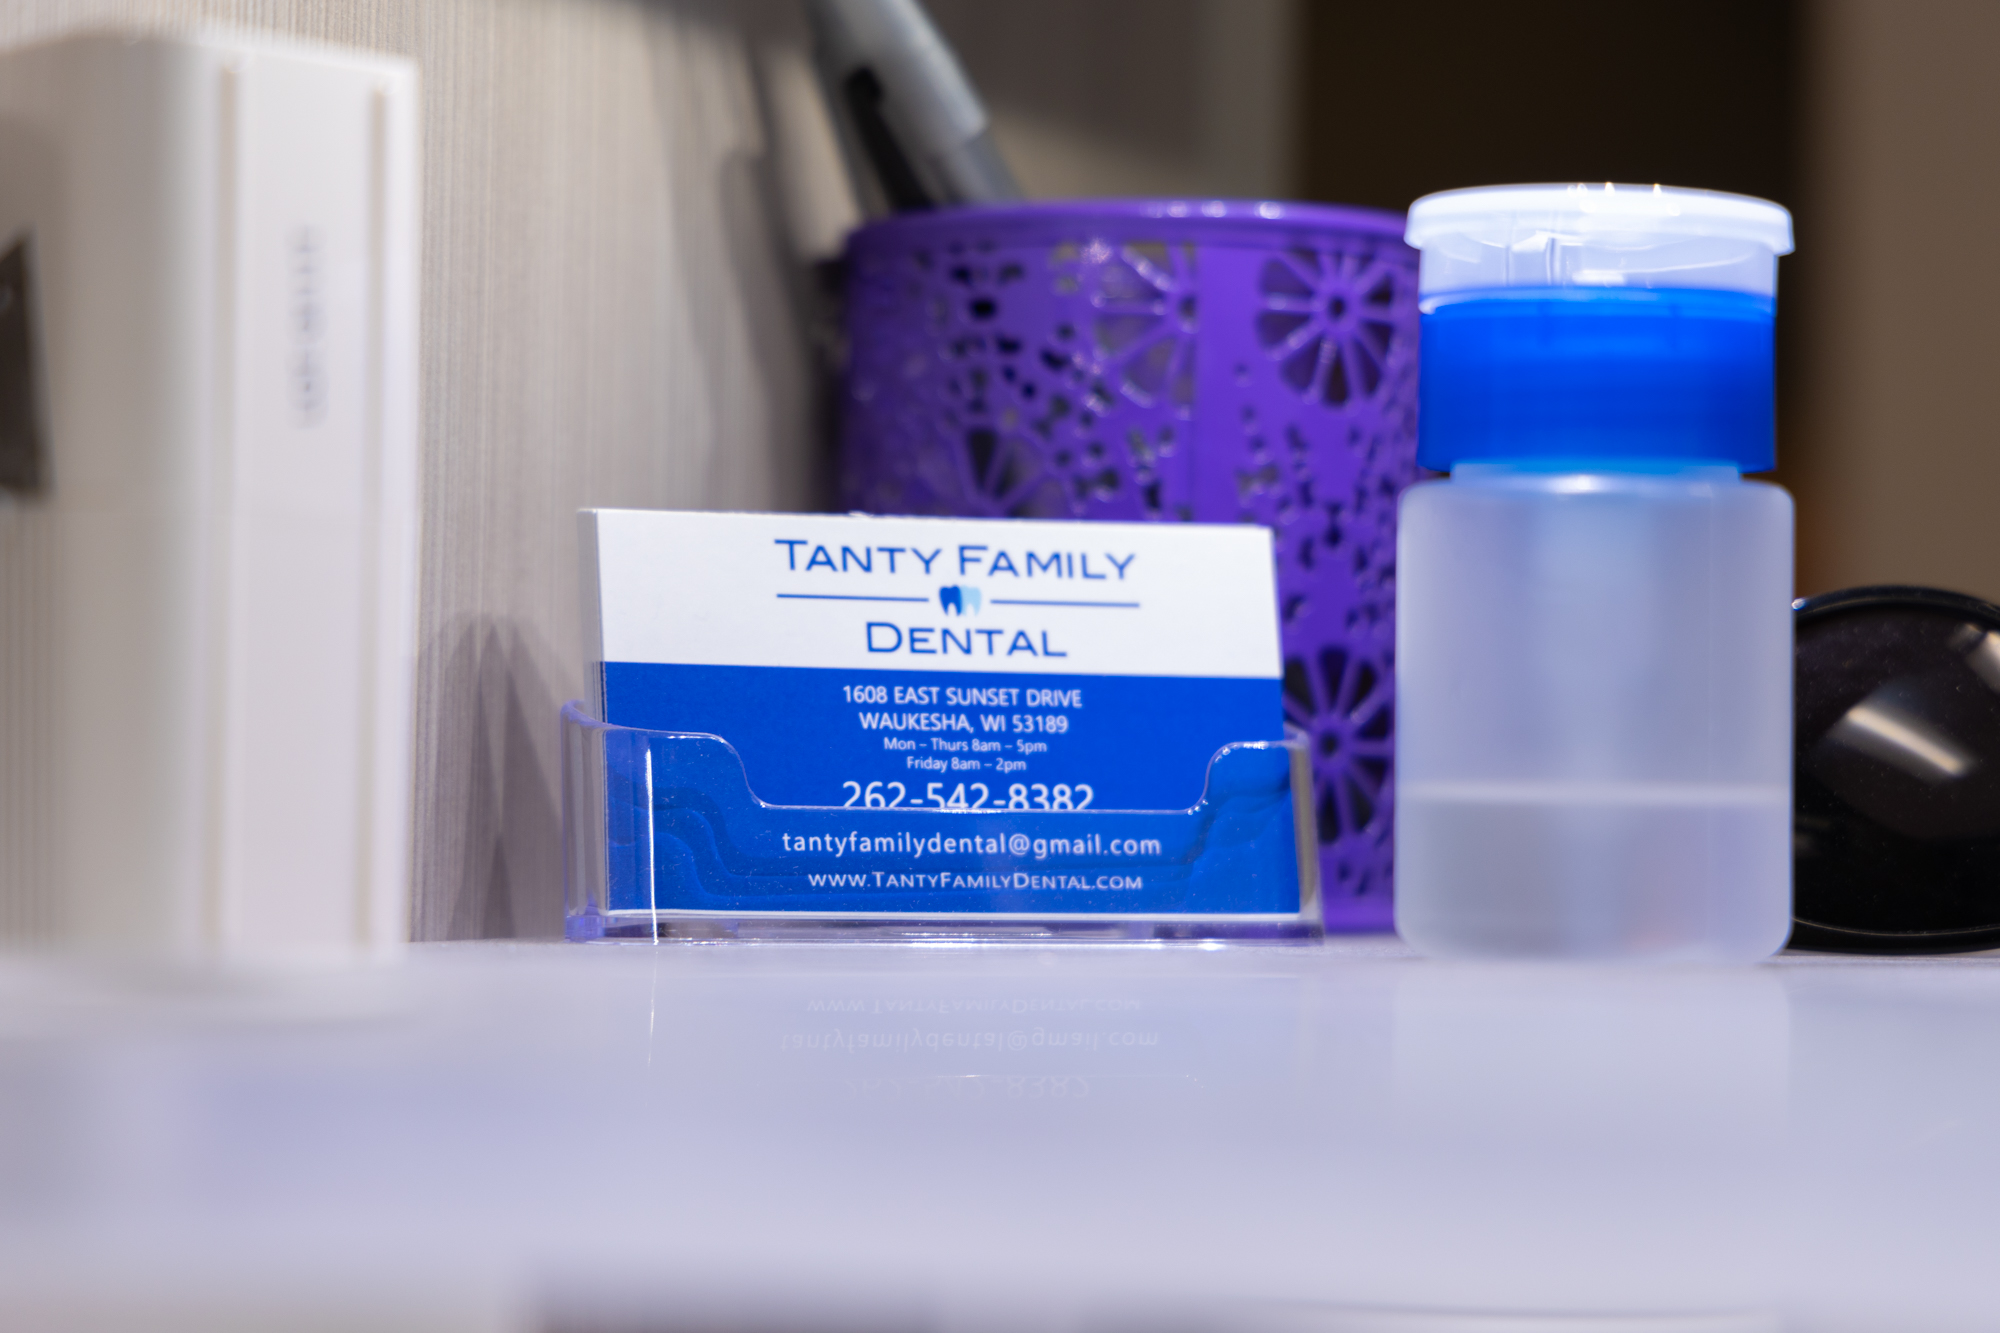 Tanty Family Dental Contact Cards